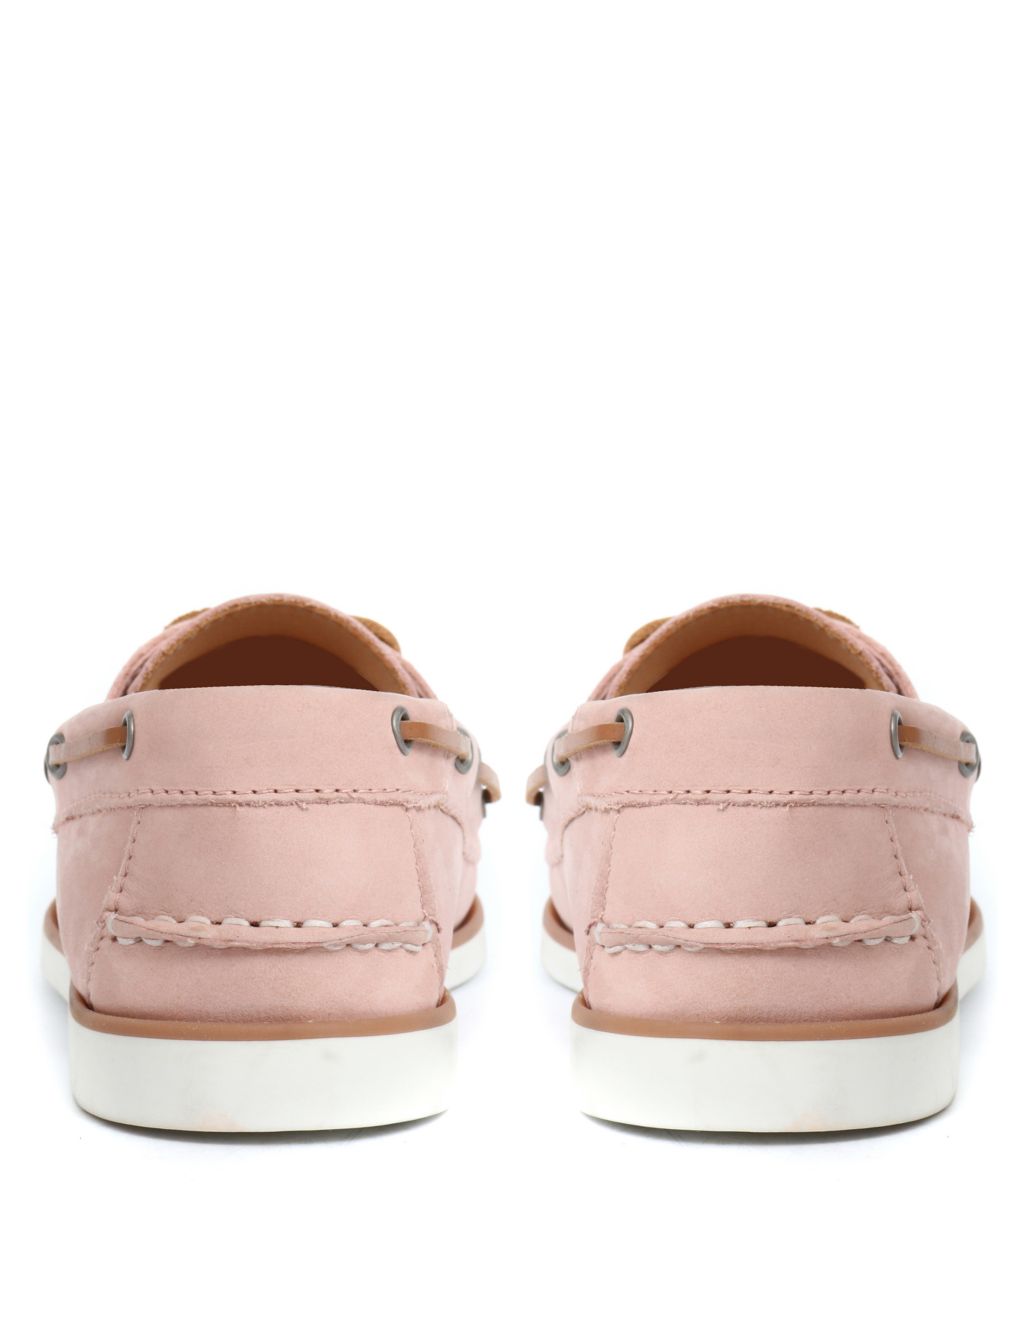 Leather Lace Up Slip On Boat Shoes image 3